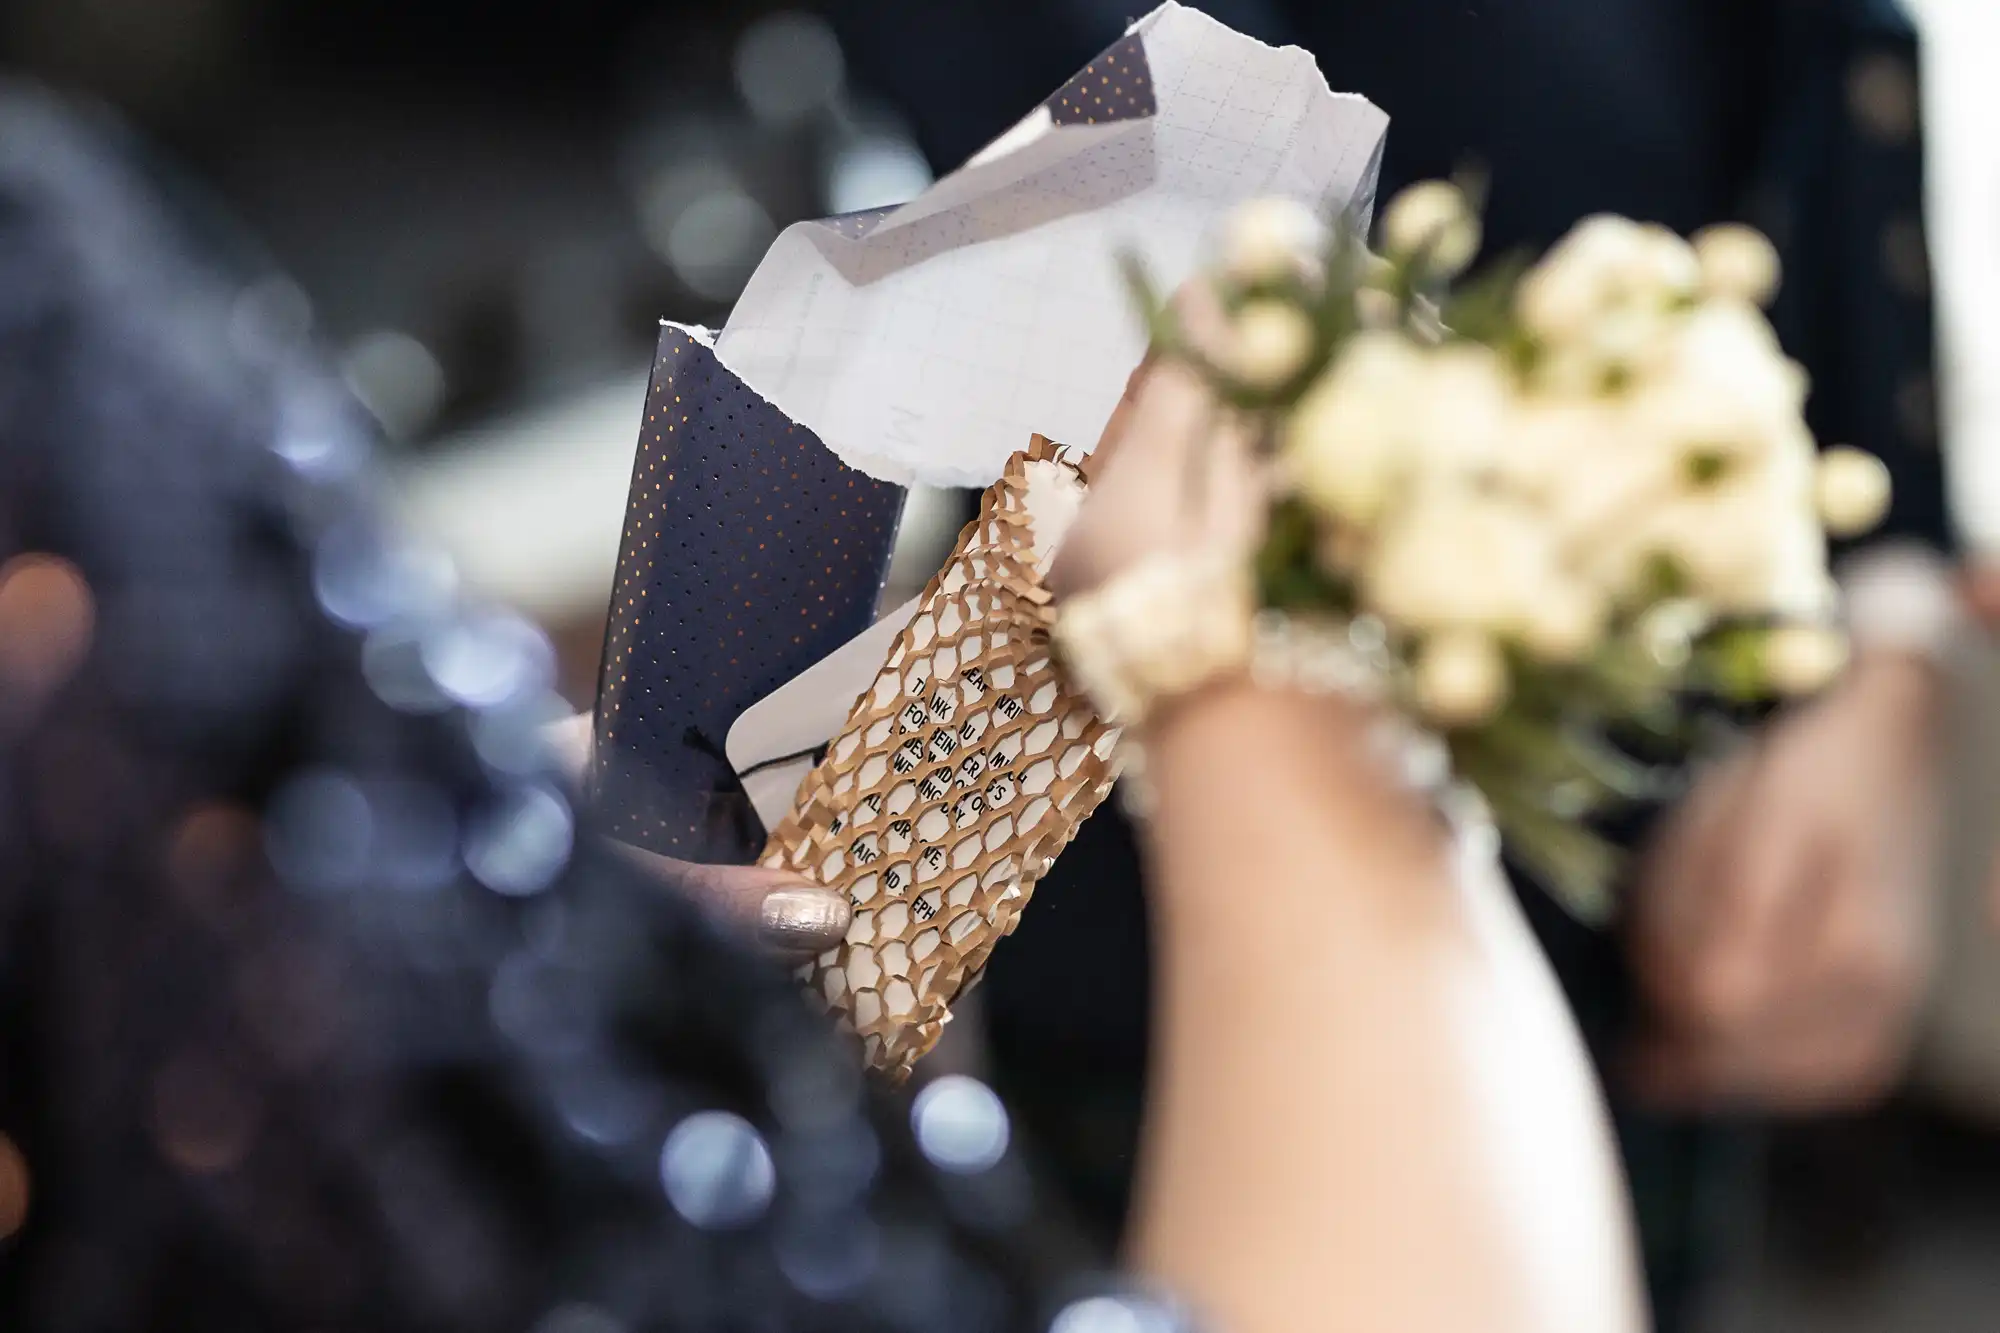 A person opens a small, intricately wrapped gift while holding a bouquet of white flowers.